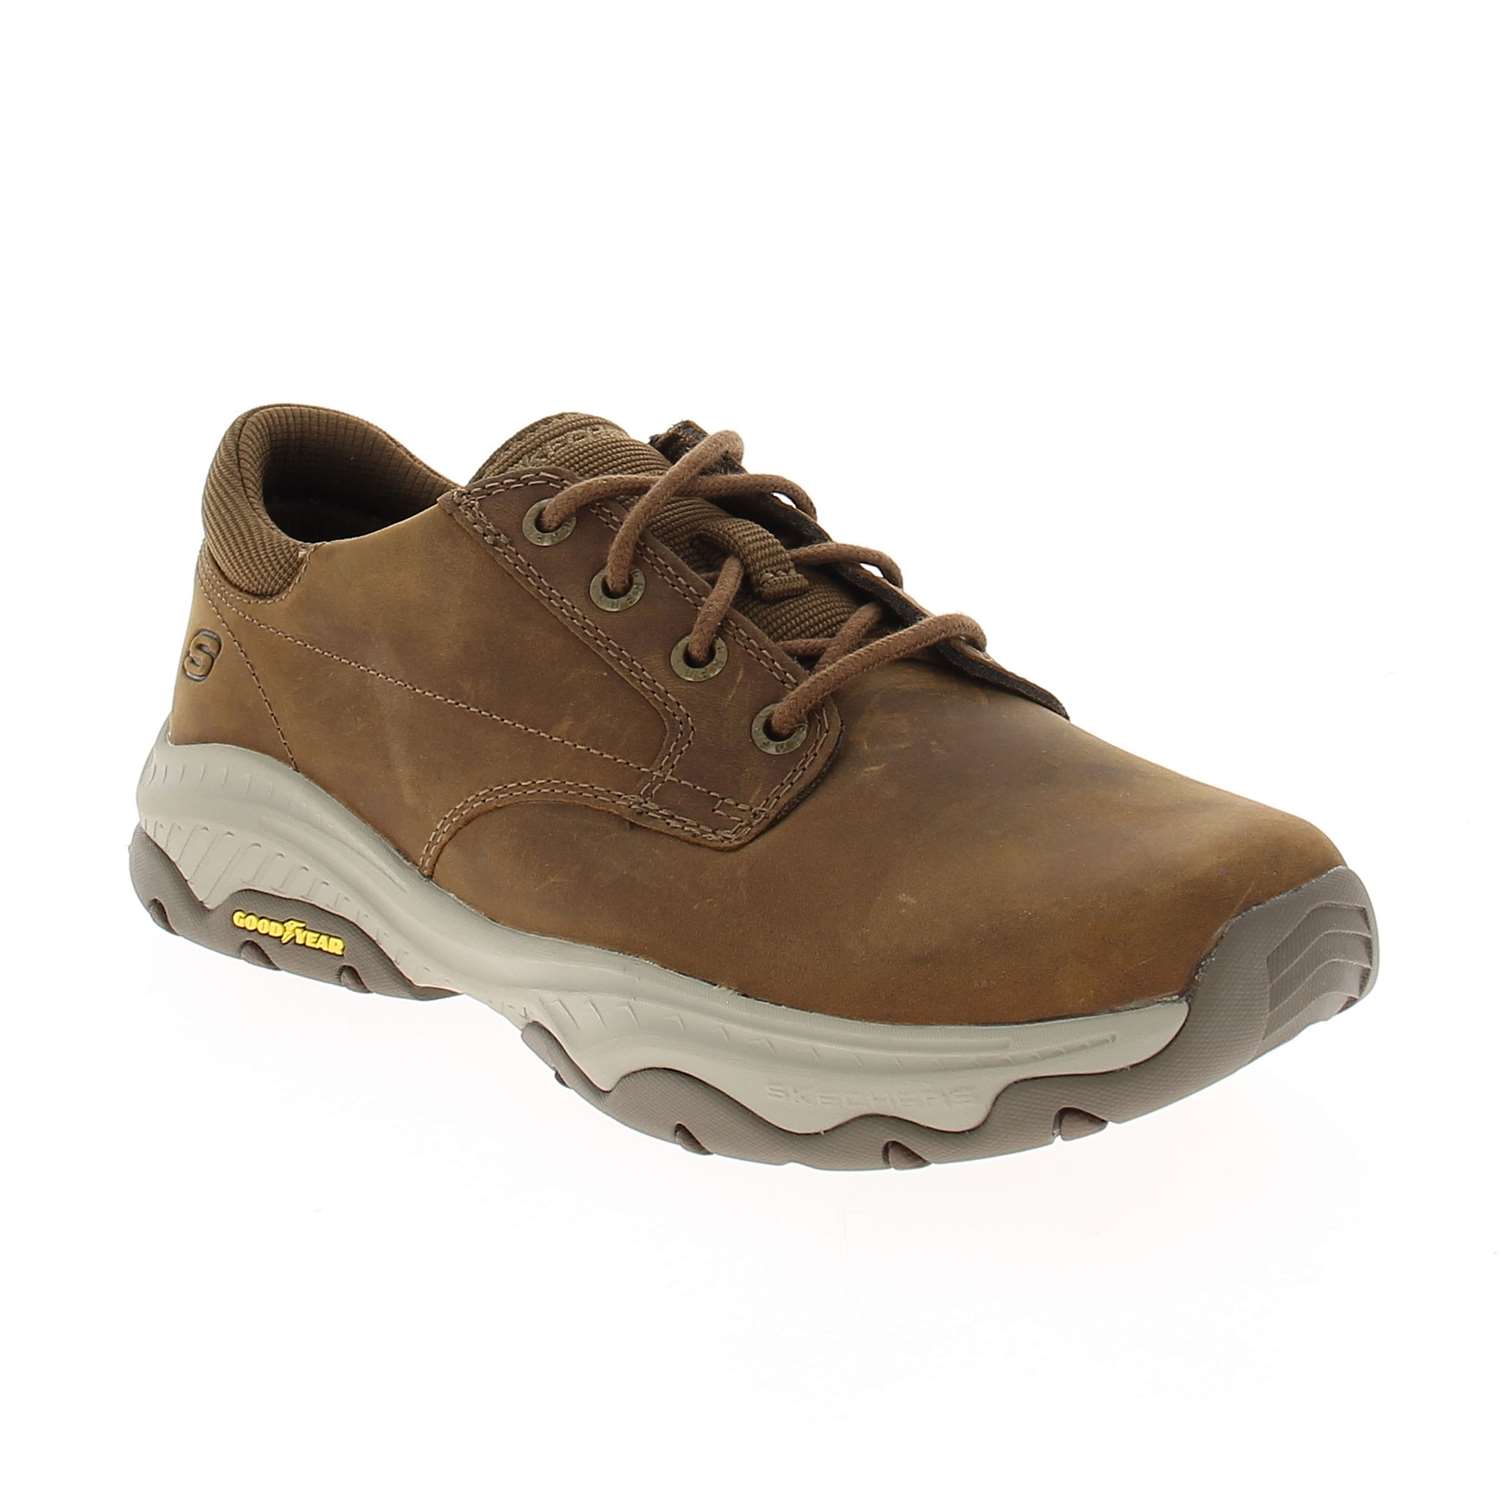 01 - CRASTER RELAXED FIT - SKECHERS - Chaussures à lacets - Nubuck